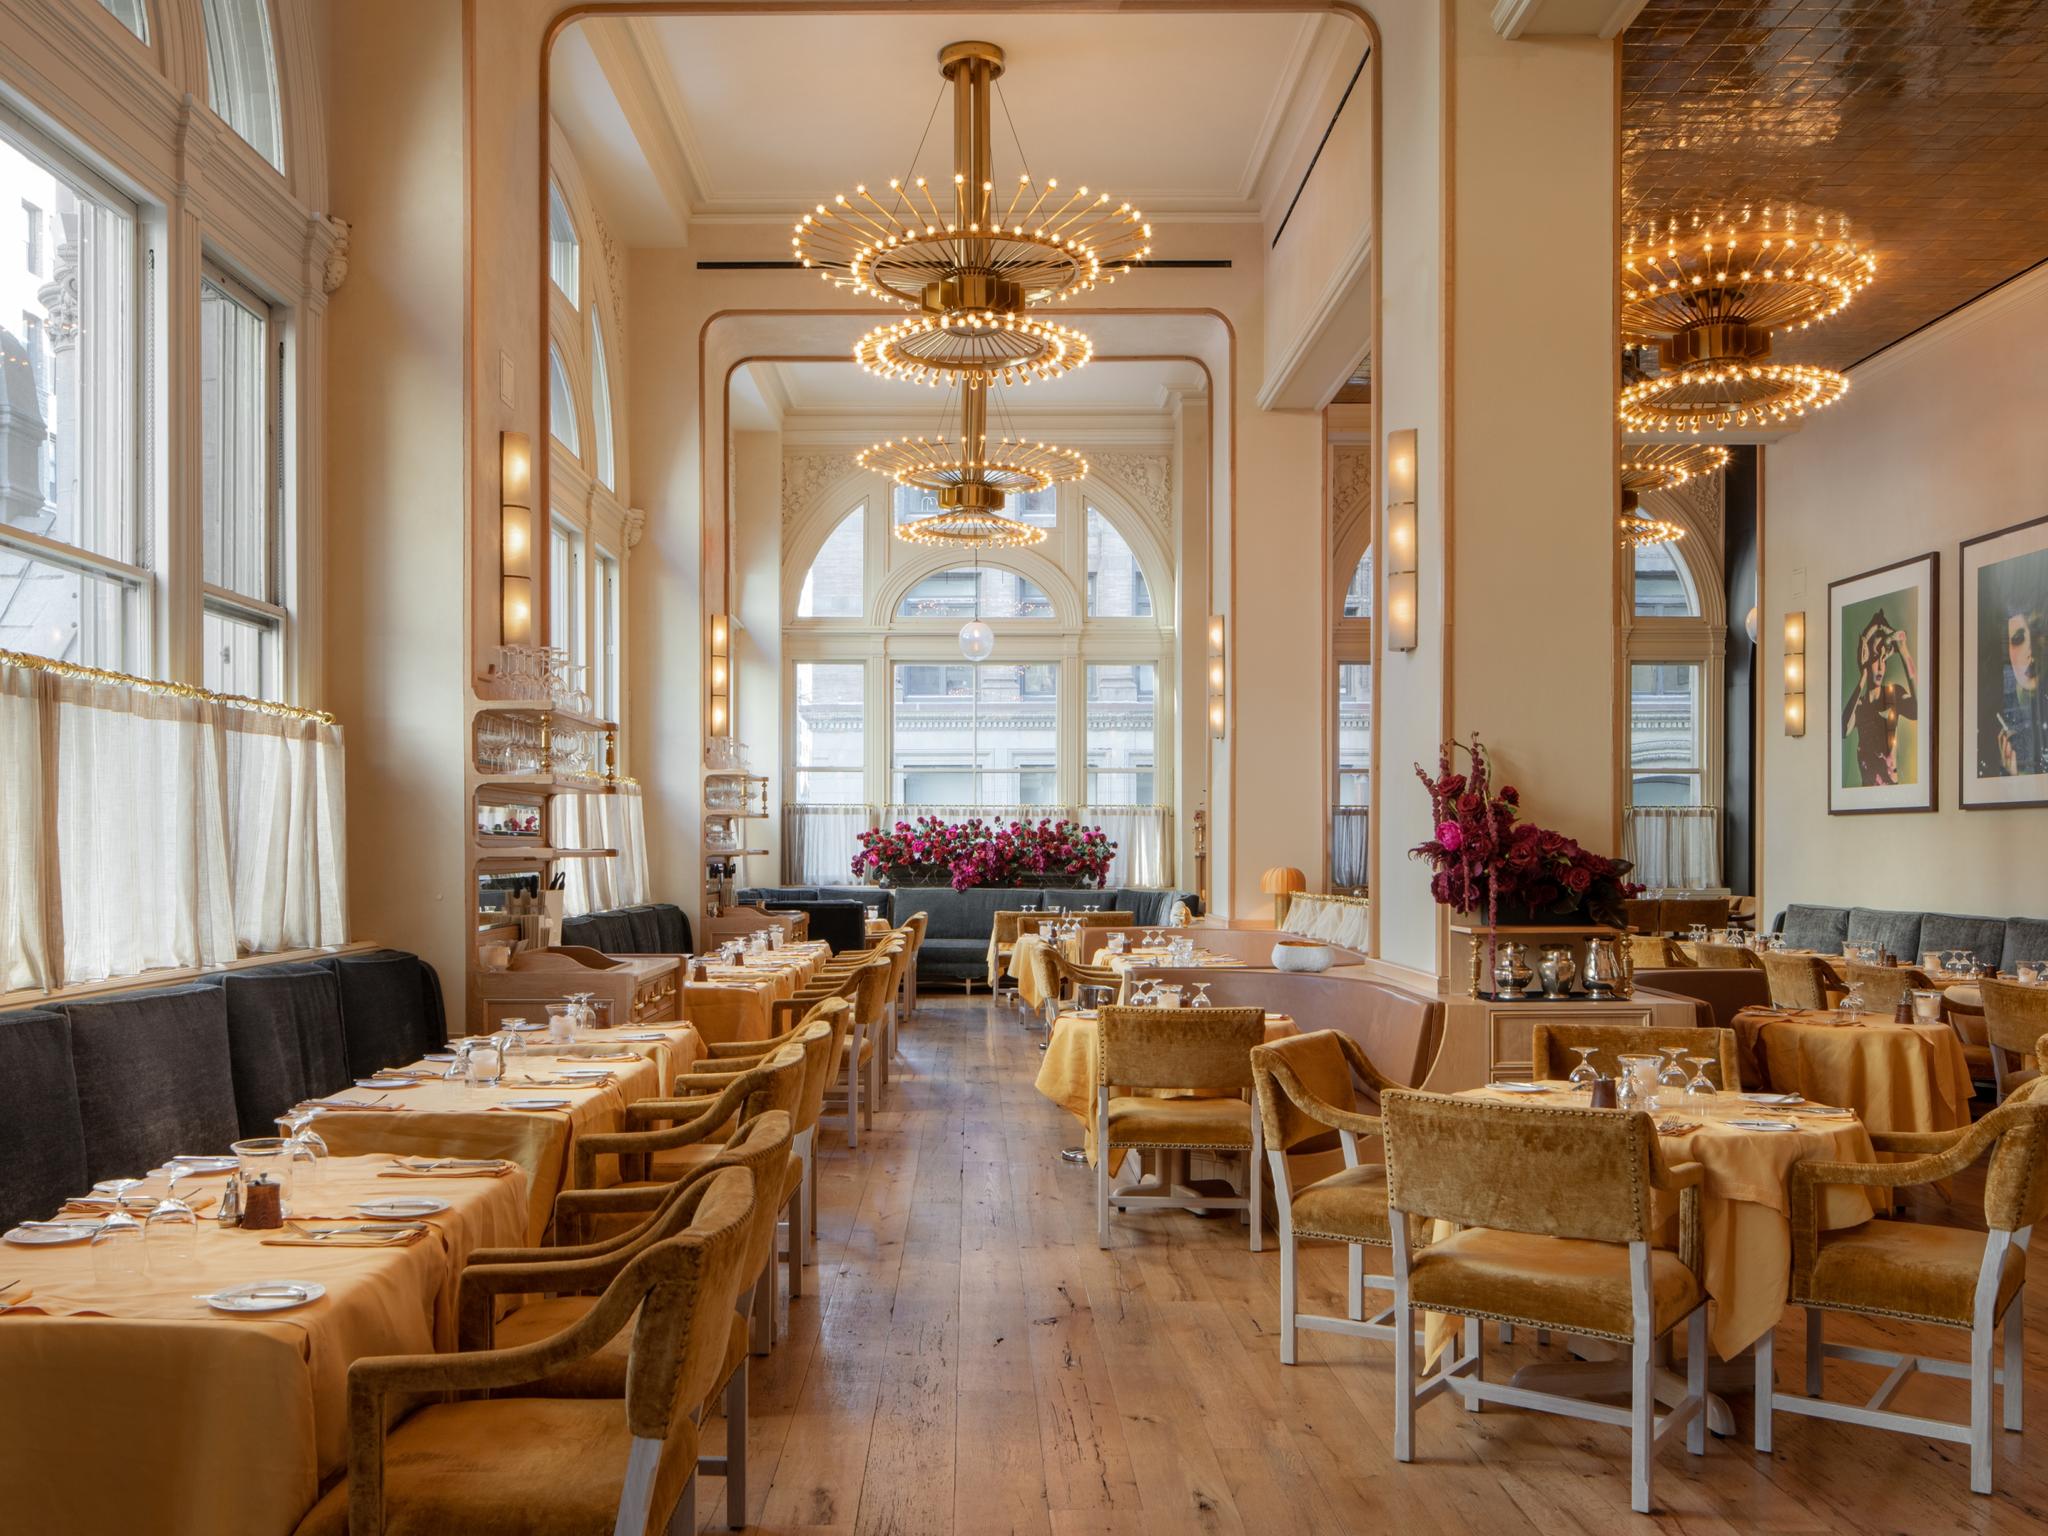 Discover the Top 10 Restaurants in New York City